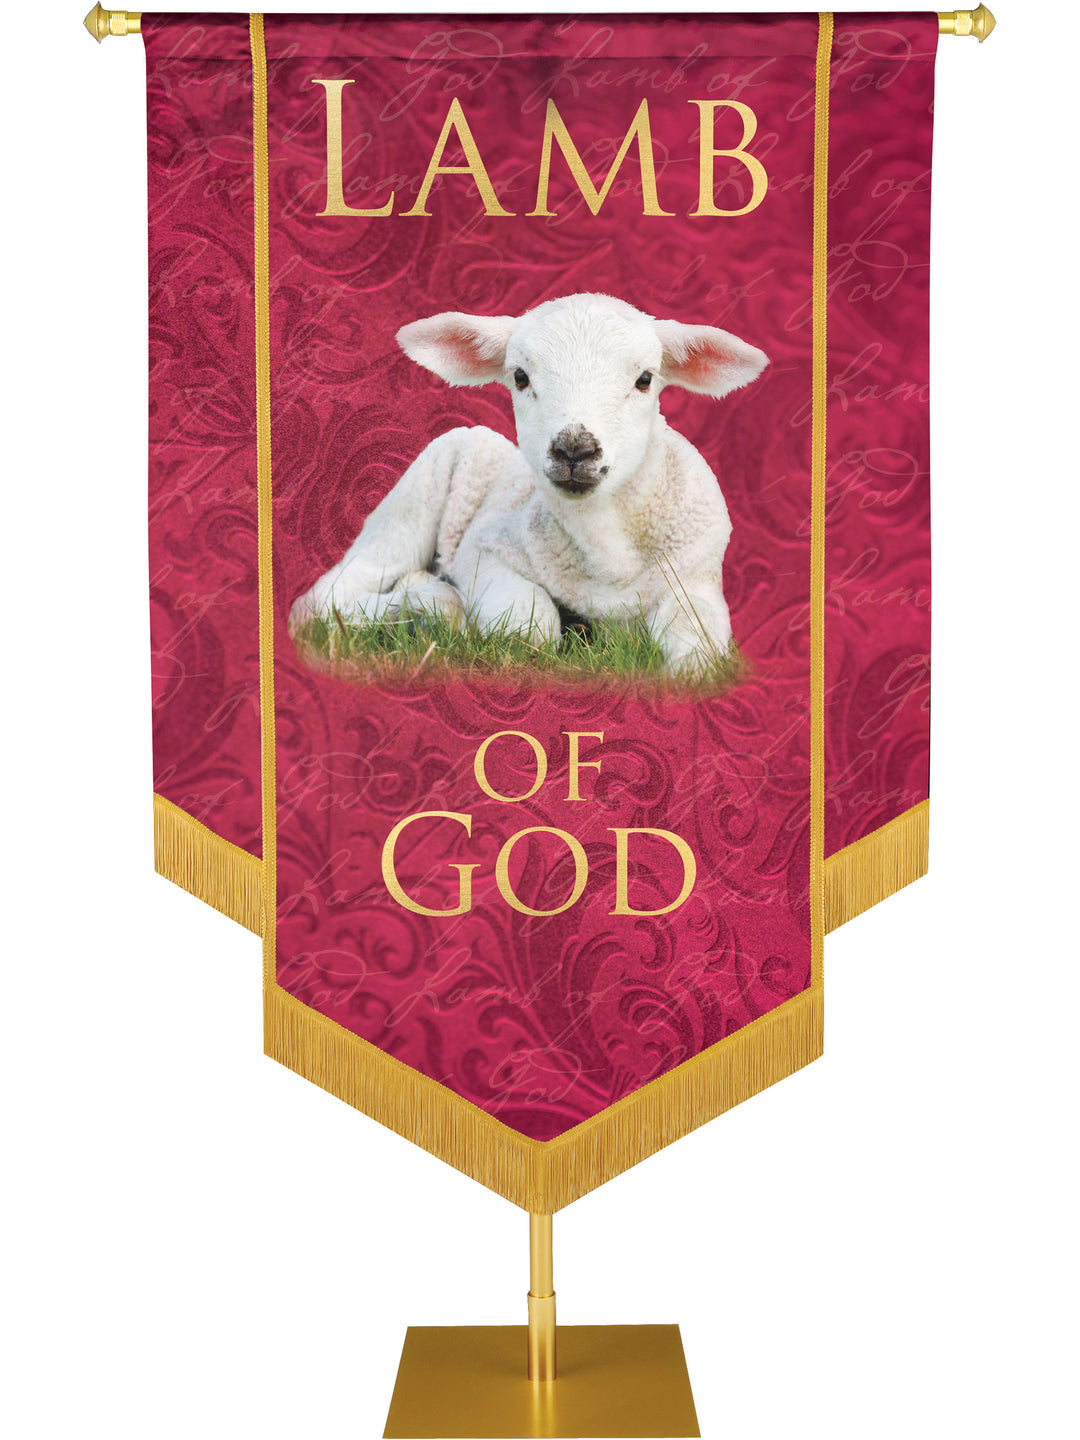 Names of Christ Lamb of God Embellished Banner - Handcrafted Banners - PraiseBanners